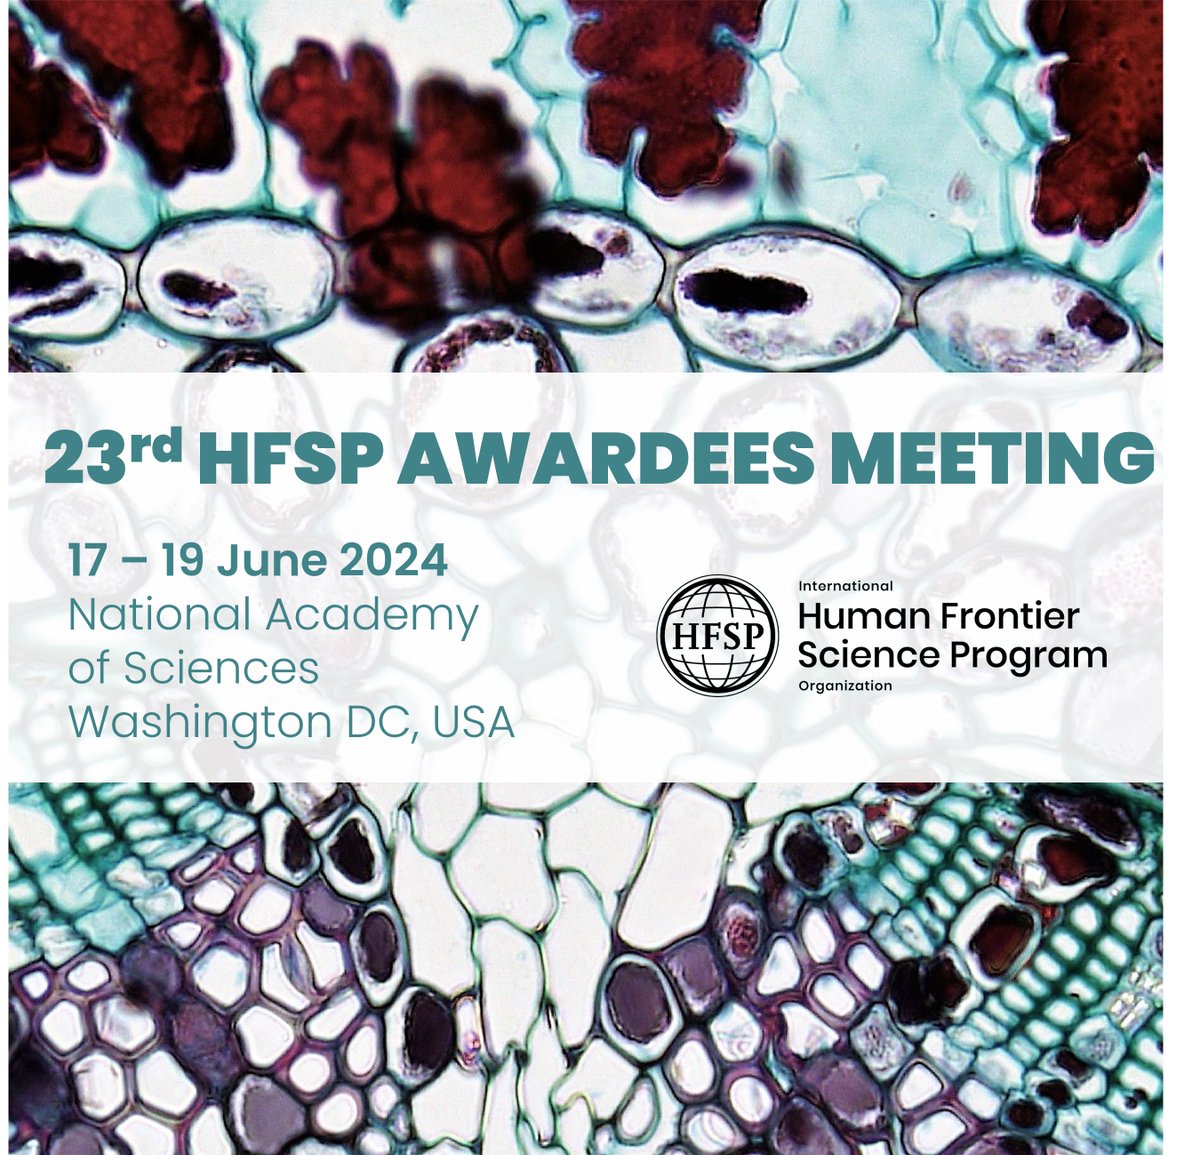 Attention #HFSPAwardees and #HFSPAlumni!🙌The Call for Abstracts for the upcoming #HFSPAwardeesMeeting is now open! We're excited to learn all about your groundbreaking research!🌟 Submit your abstract: bit.ly/48IRLid More info: bit.ly/48WaxTz #HFSPMeeting2024🤩